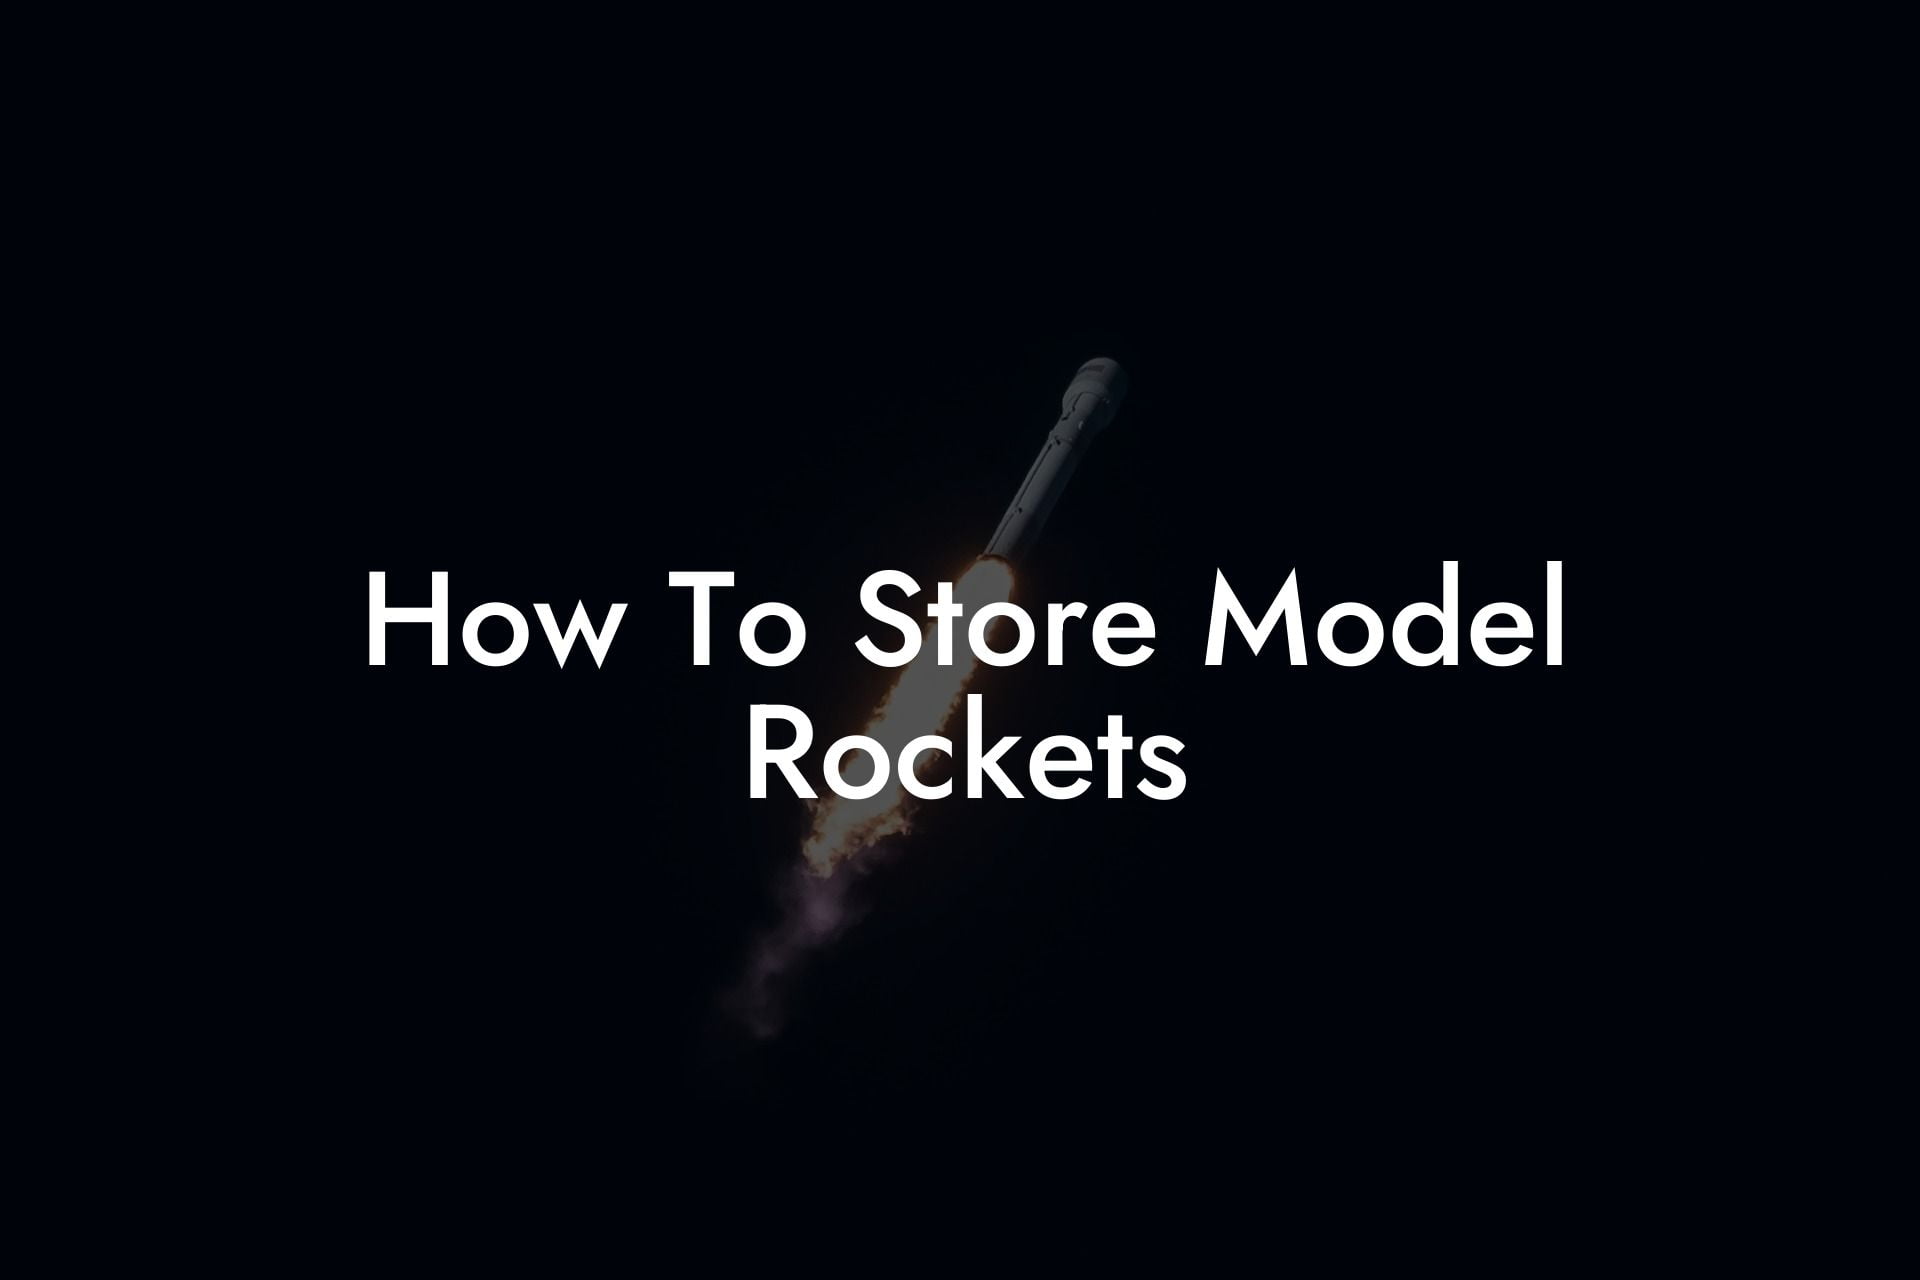 How To Store Model Rockets